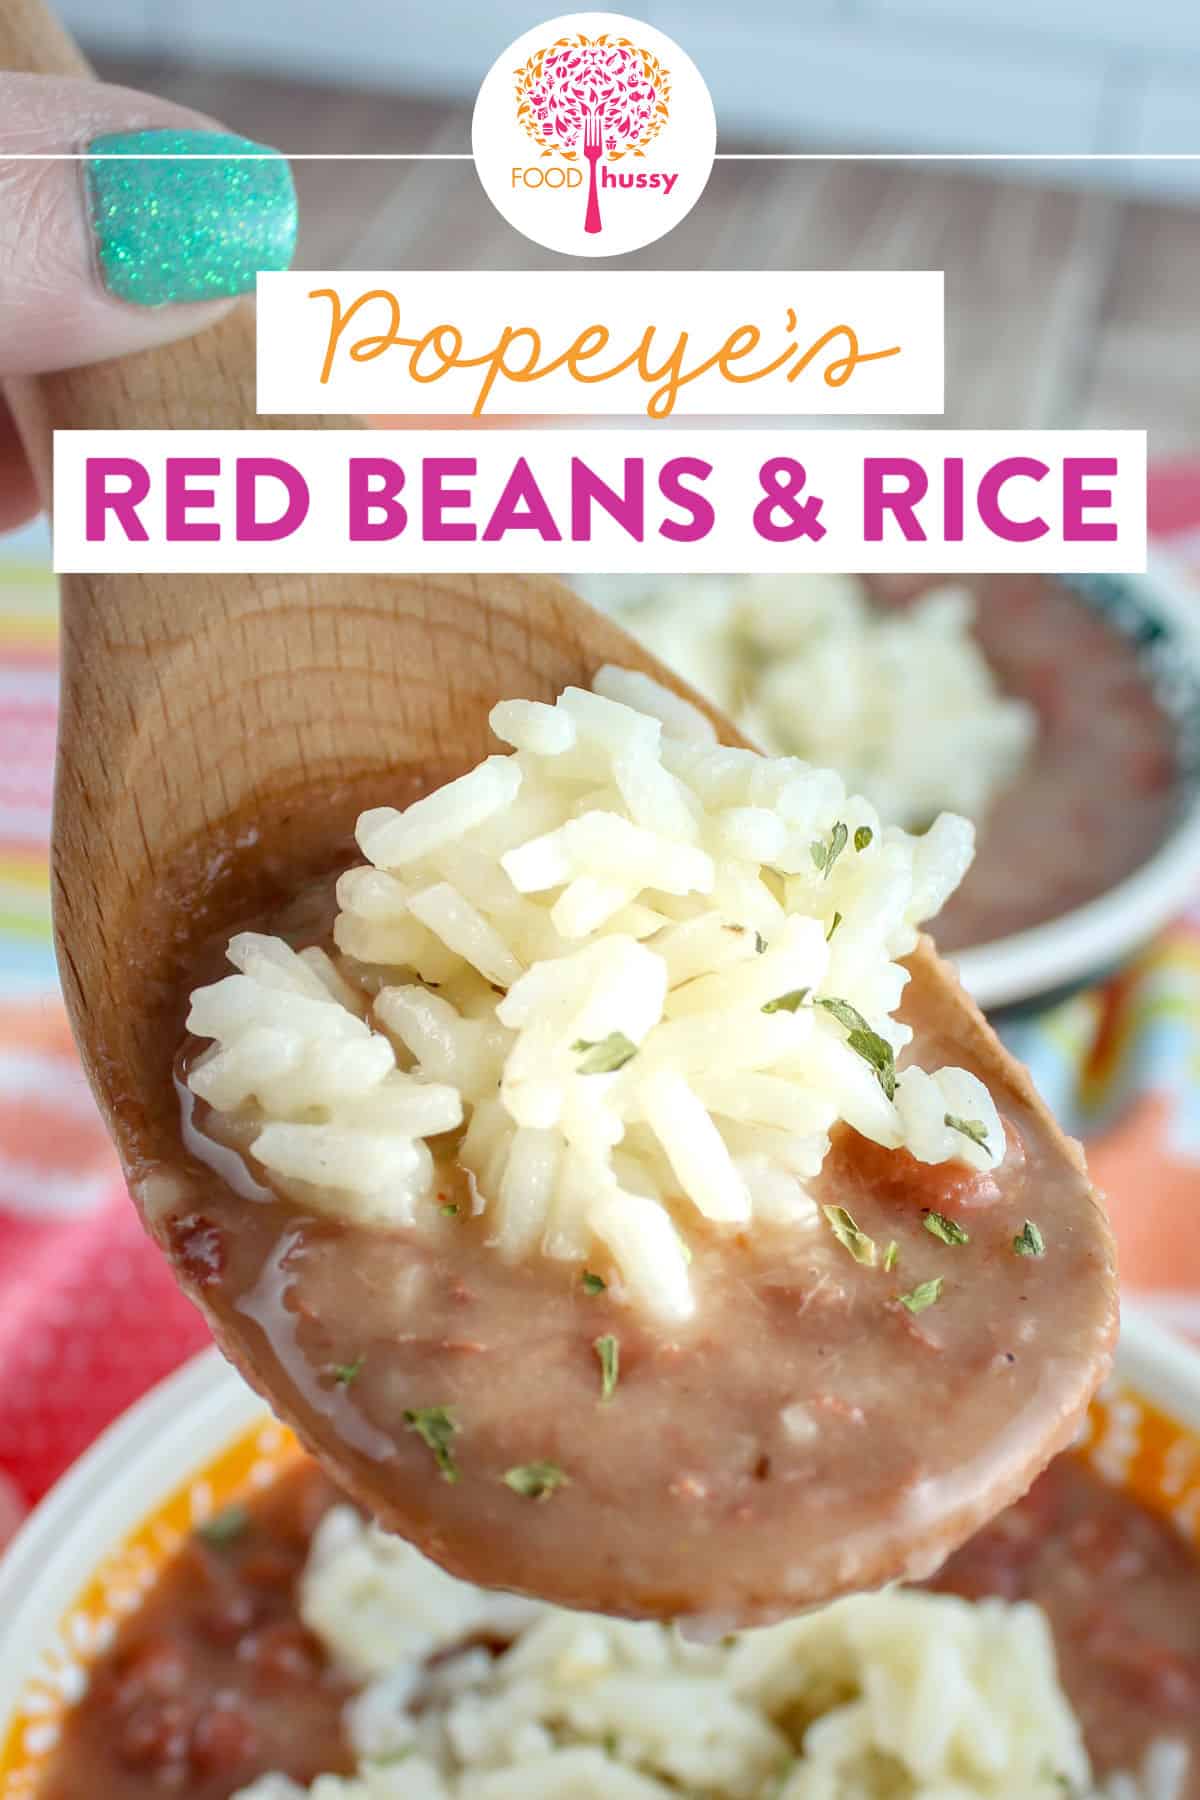 Popeye’s Red Beans & Rice is one of my favorite take-out side dishes and making at home is SO SIMPLE!!! This Copycat Popeye’s recipe has creamy red beans with a slightly smoky flavor topped with fluffy white rice – the perfect side!   via @foodhussy